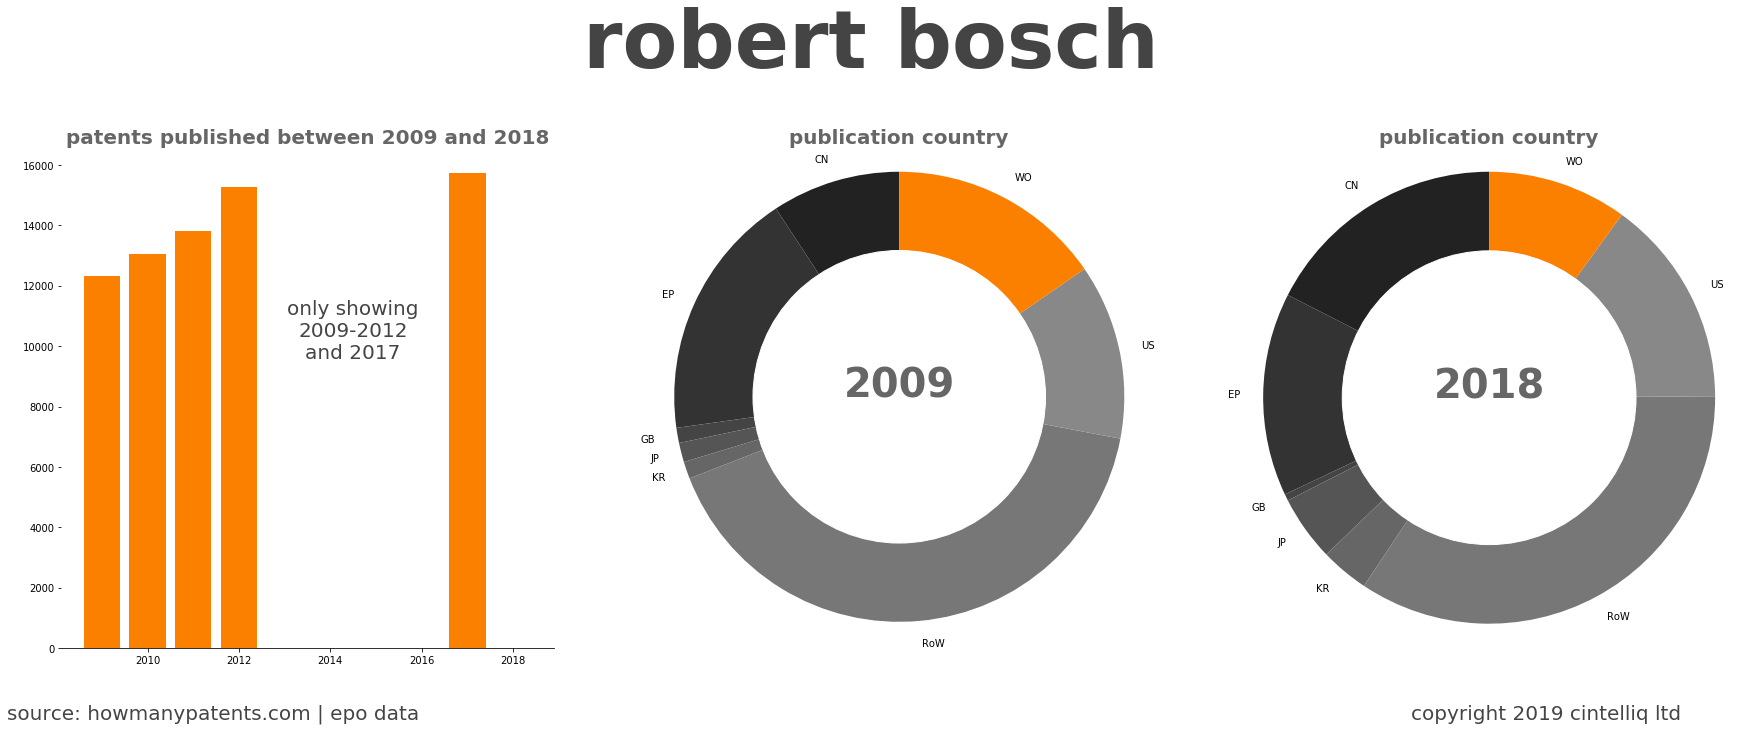 summary of patents for Robert Bosch